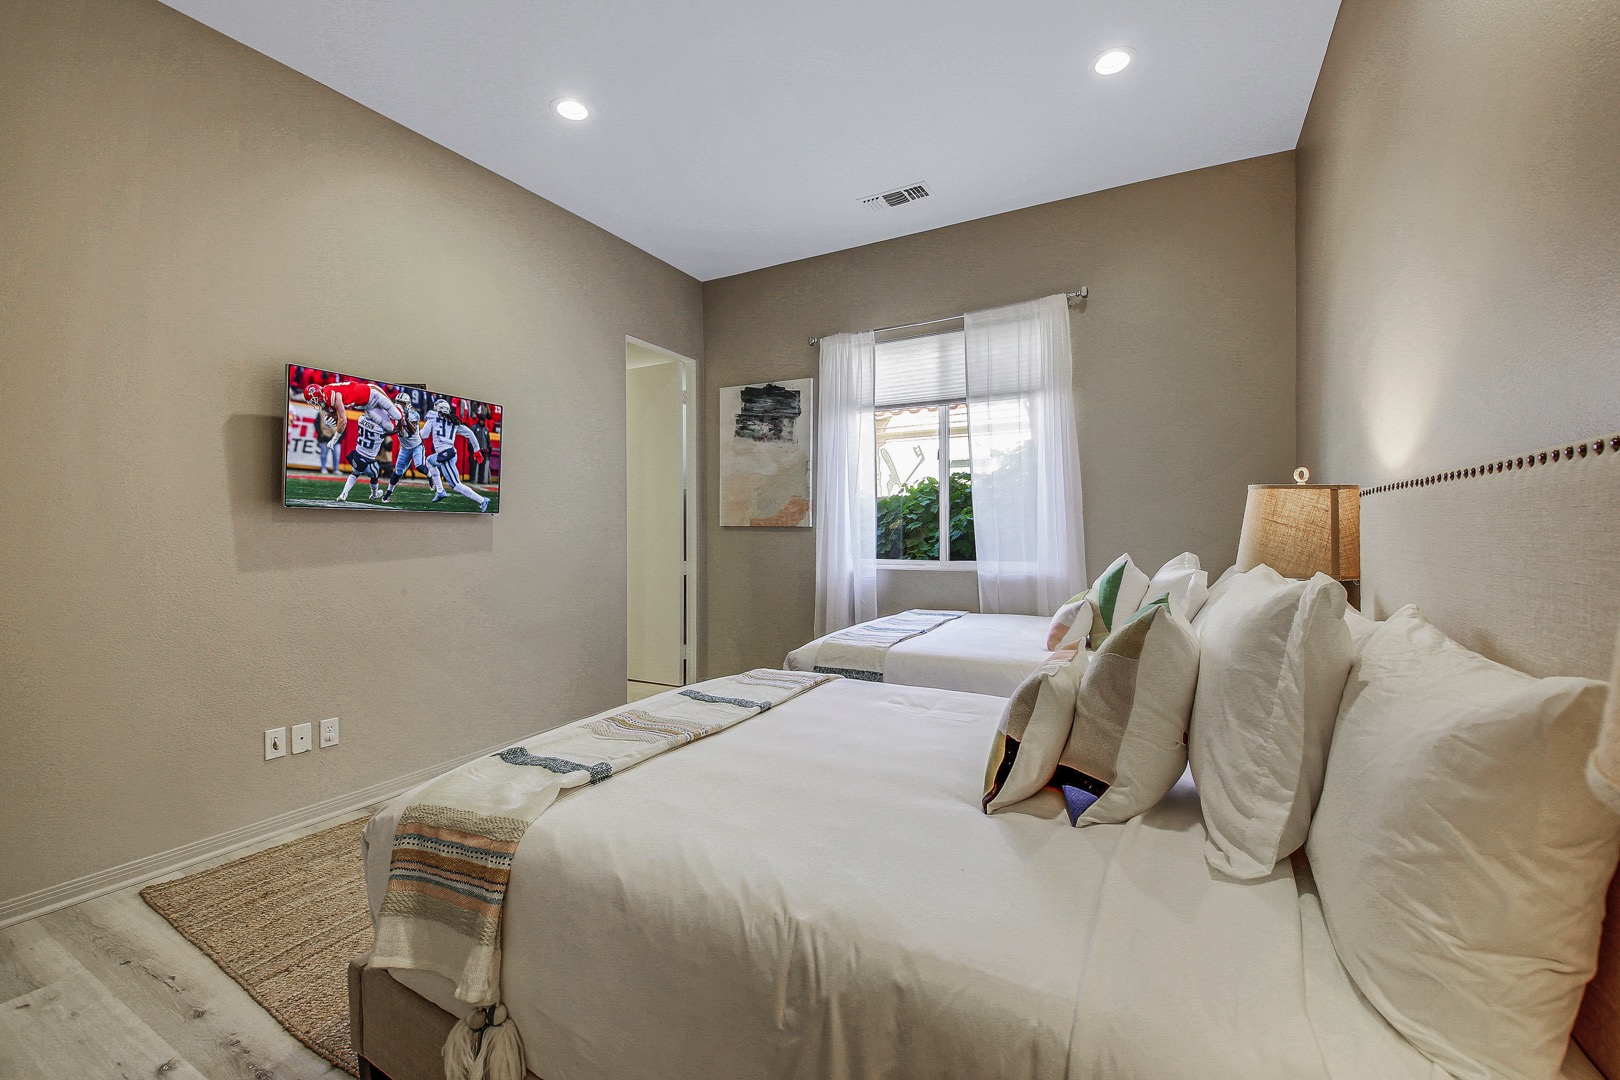 Bedroom 3 has 2 full size beds, full bath and 42-inch HDTV. this room sleeps 4